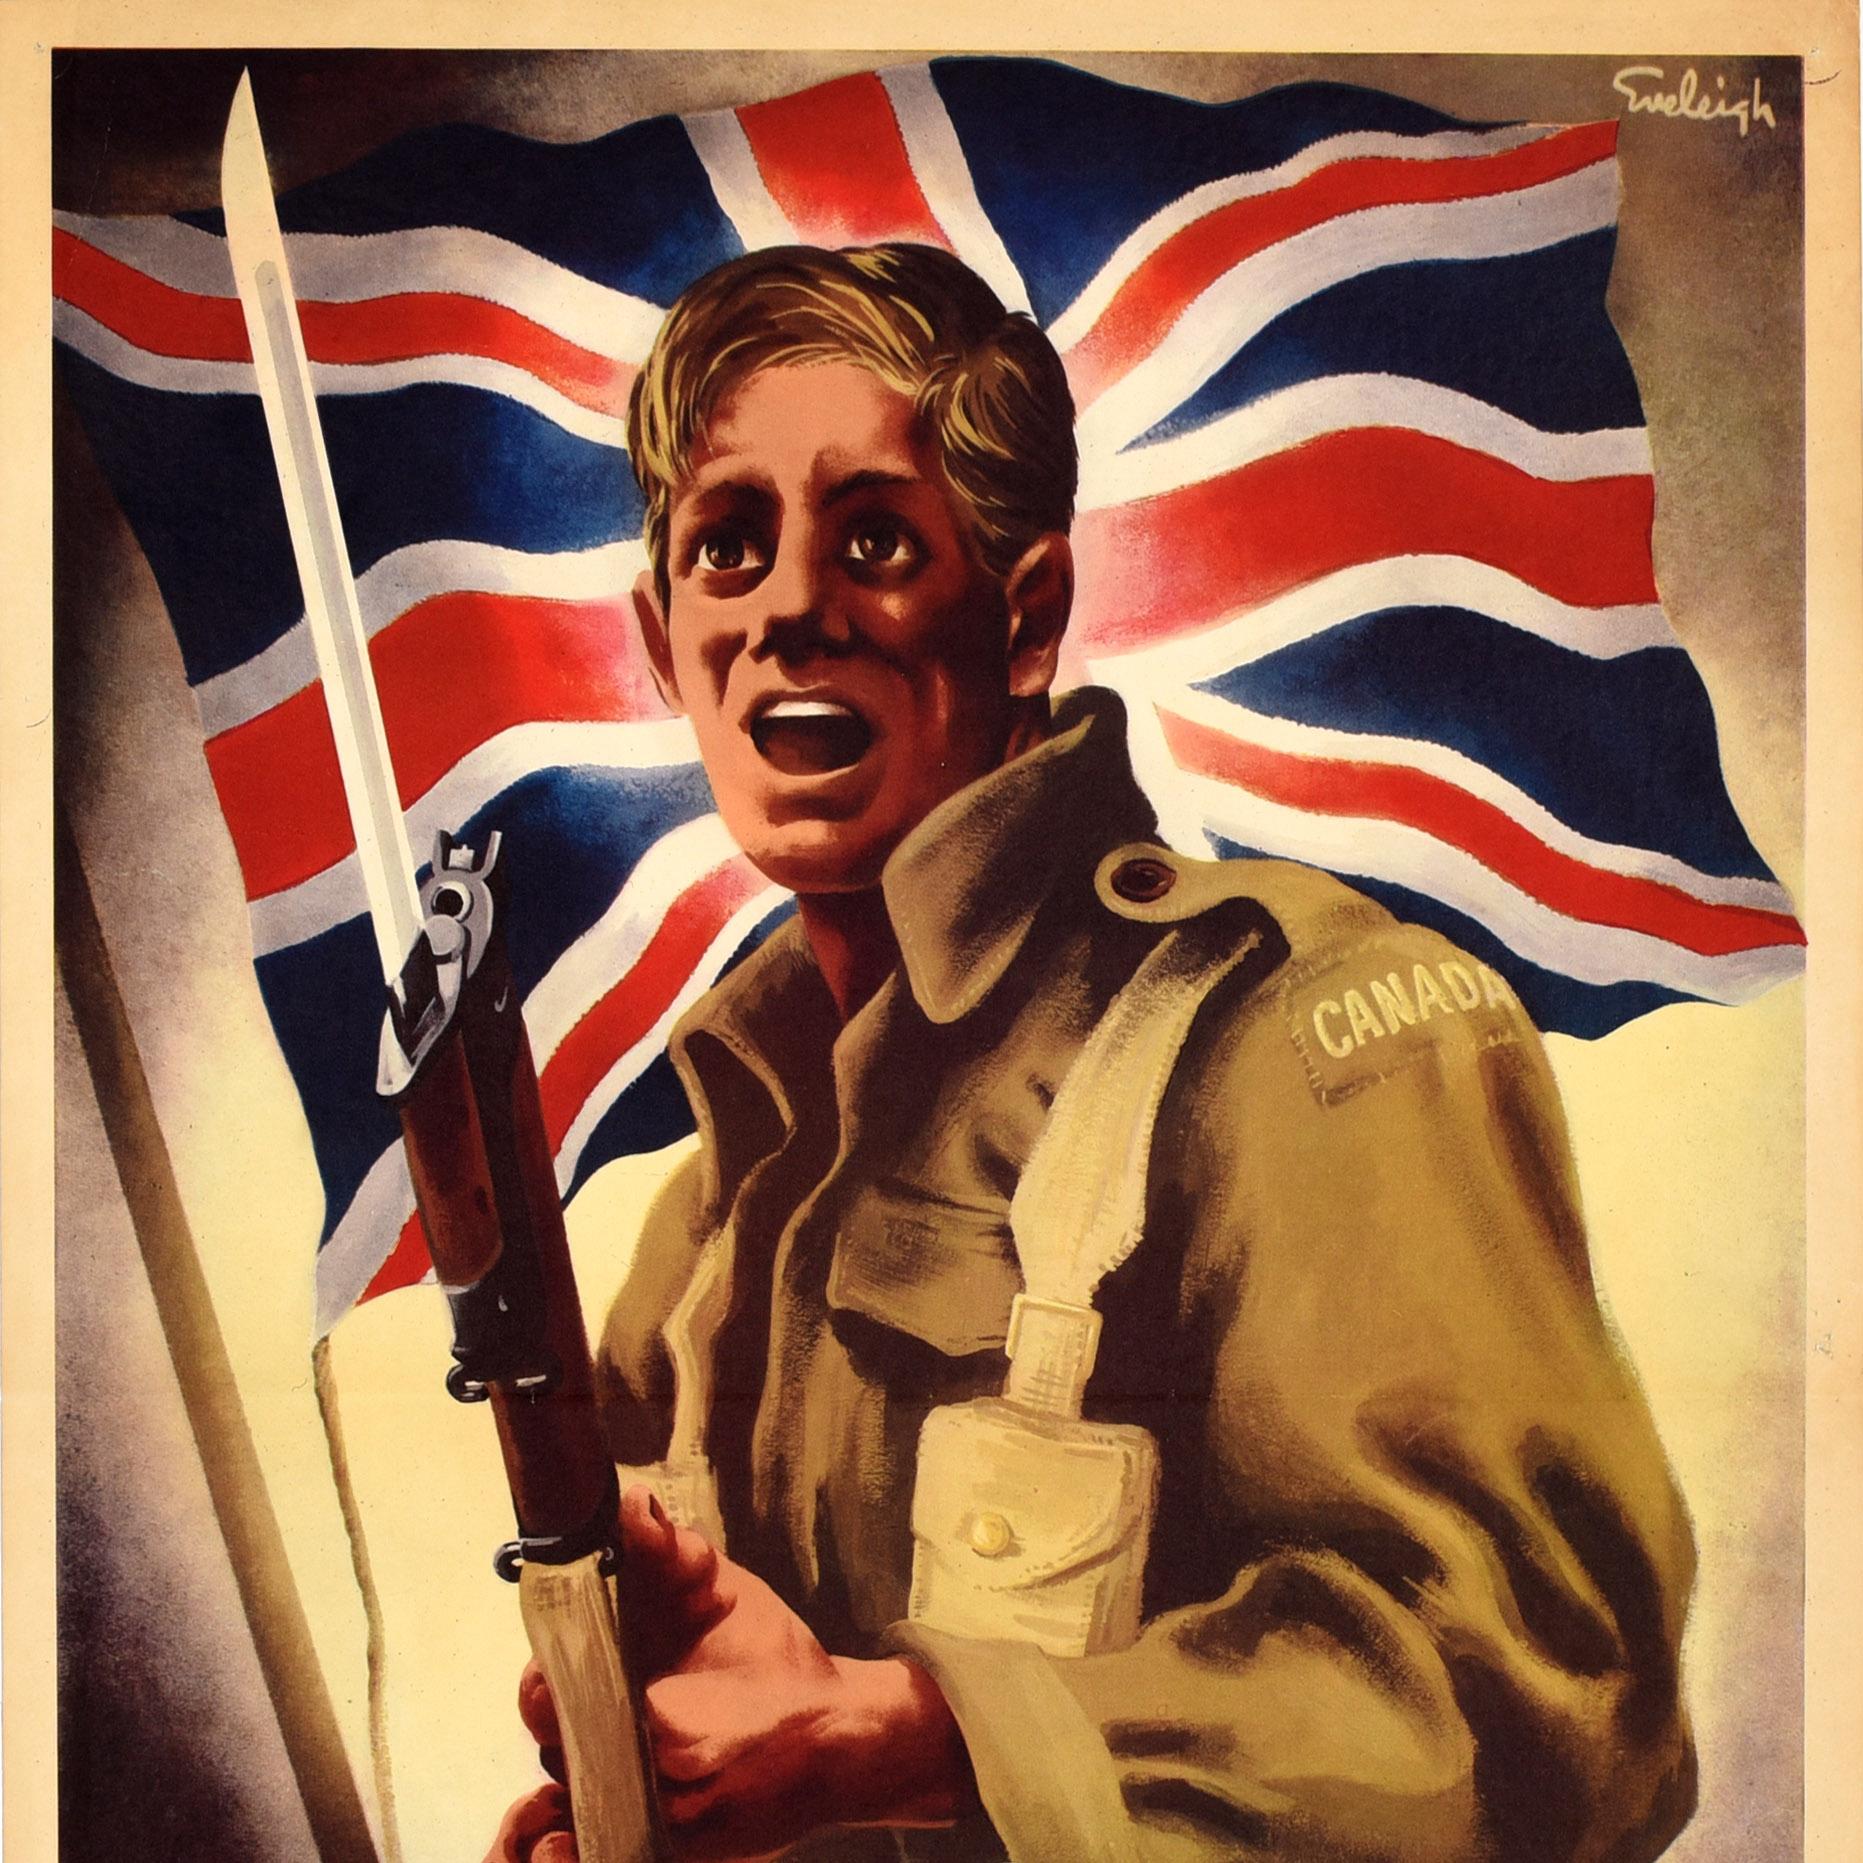 Original vintage Canadian World War Two propaganda poster - Let's Go... Canada! - issued by the director of public information under the authority of Hon J.T Thorson Minister of National War Services Ottawa. Dynamic design depicting a soldier in a